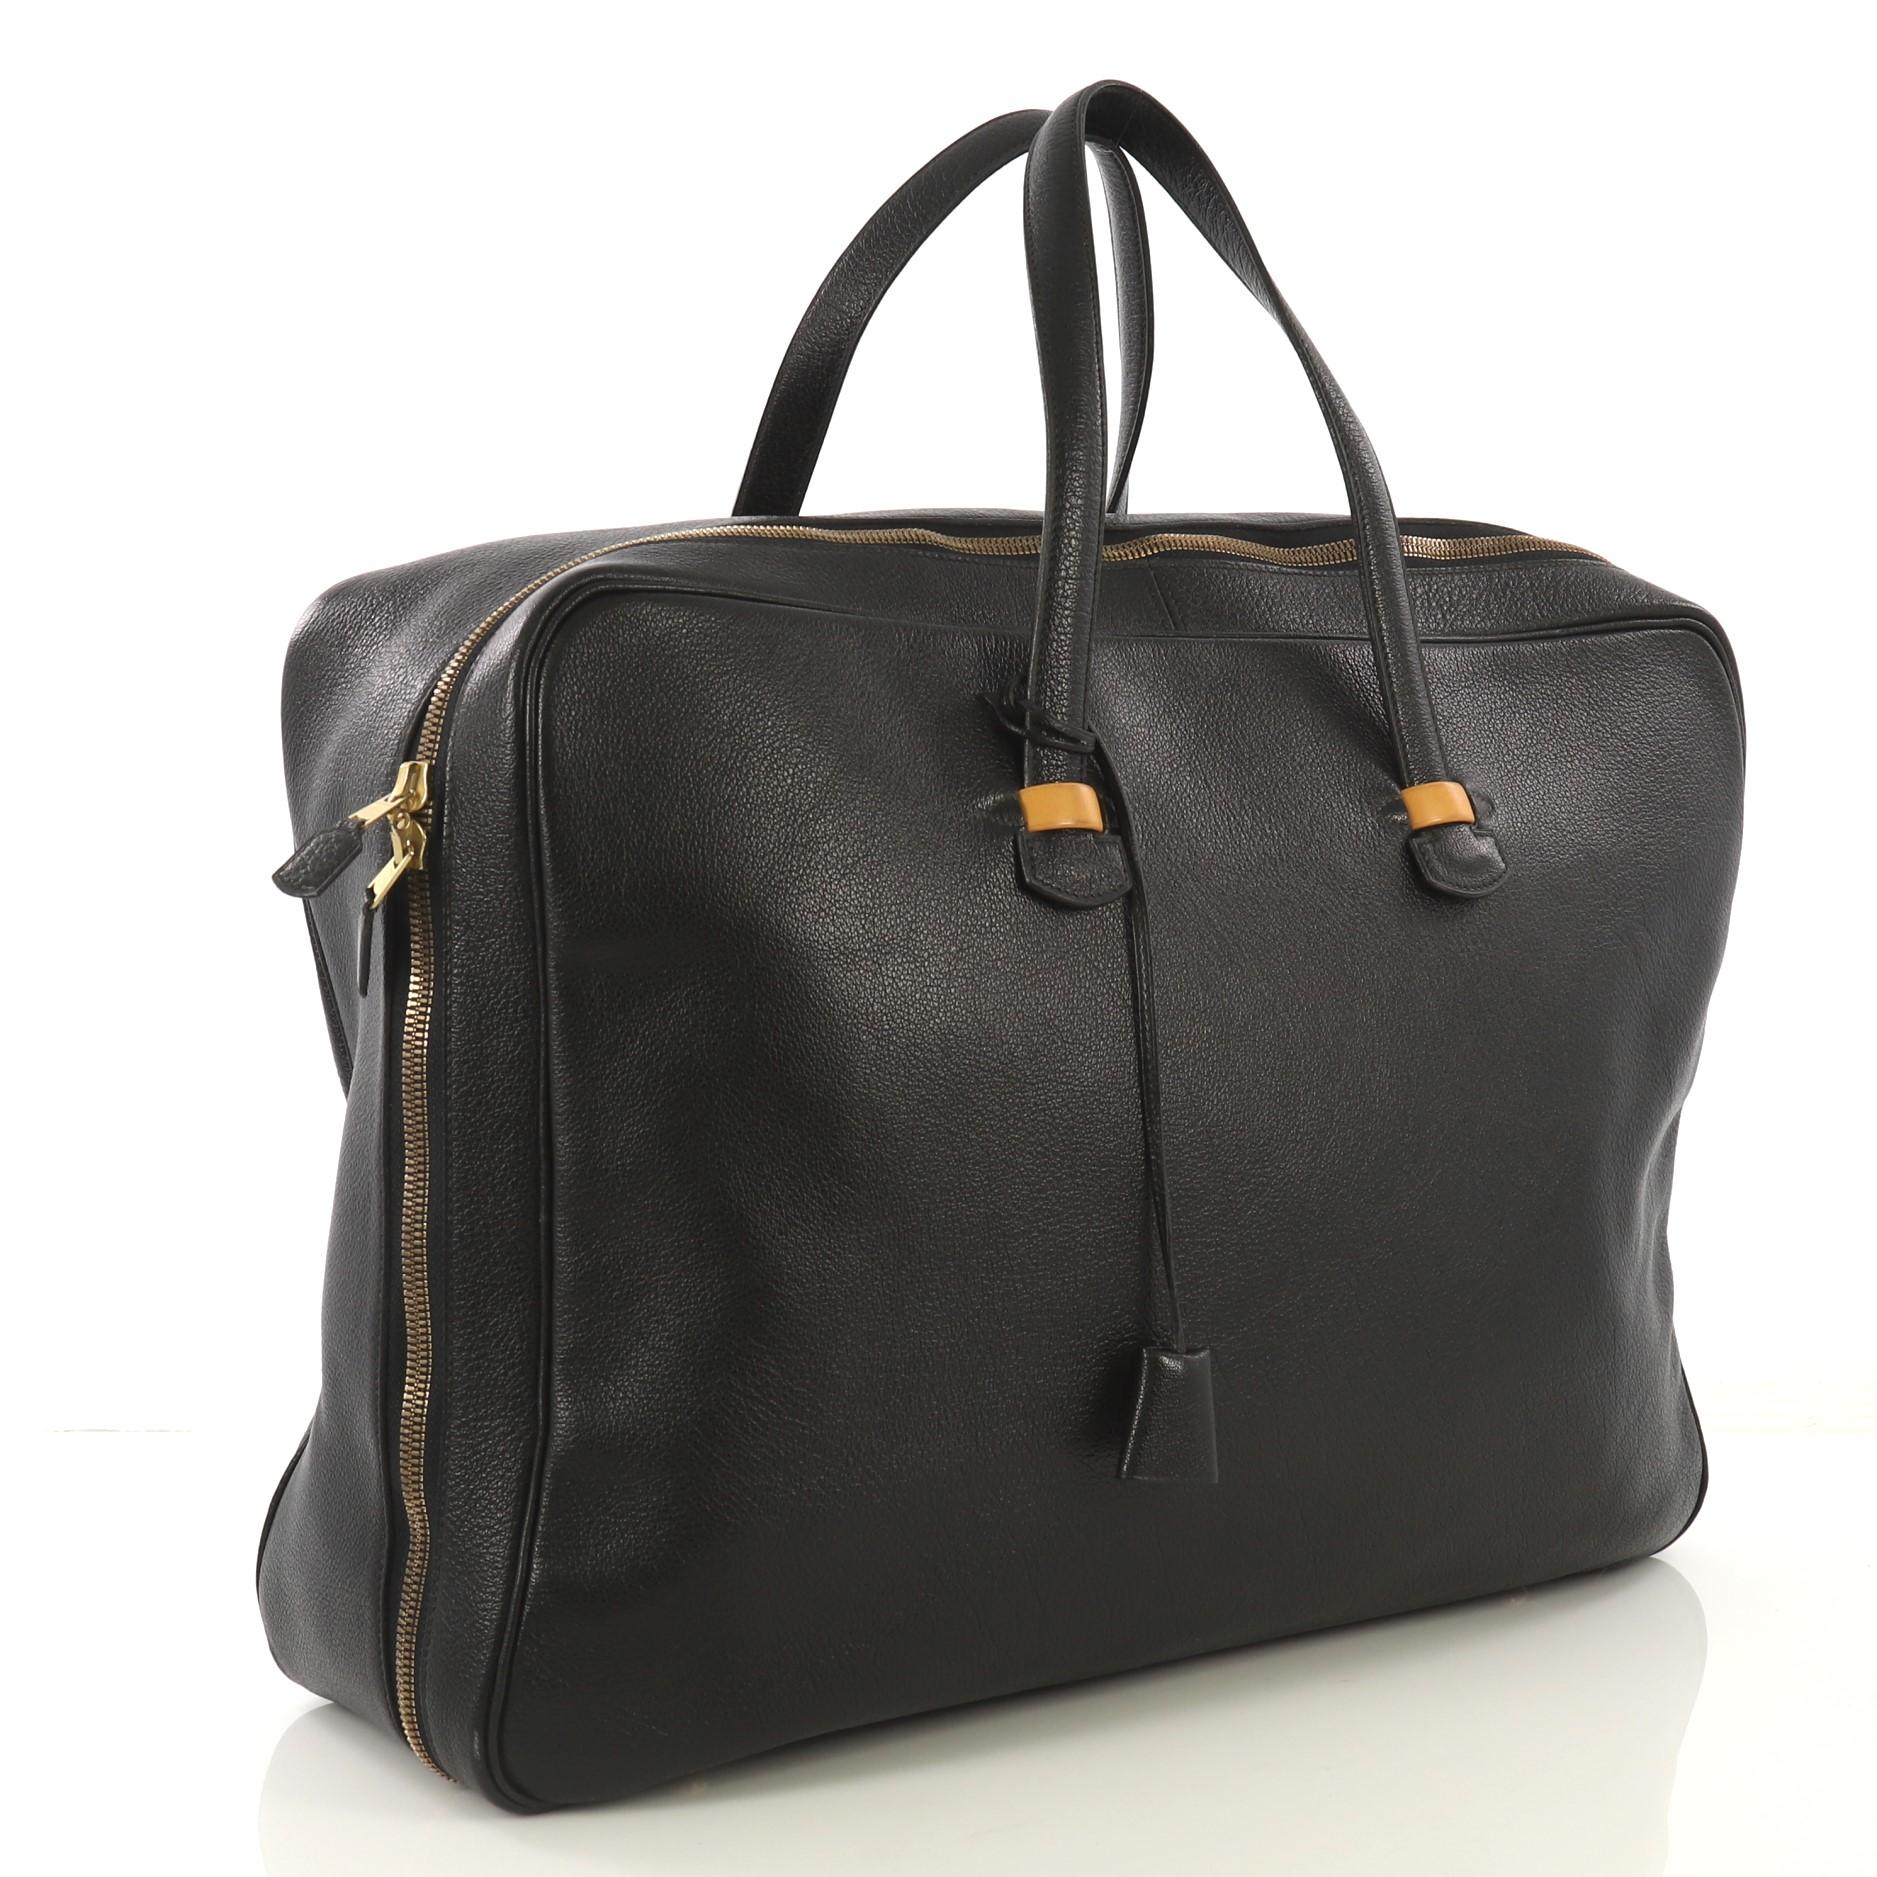 This Hermes Galop Briefcase Bag Buffalo Skipper 50, crafted from Noir black Buffalo Skipper leather and Natural Vache Naturelle, features dual flat handles and gold hardware. Its zip closure opens to a Noir black Buffalo Skipper leather interior.